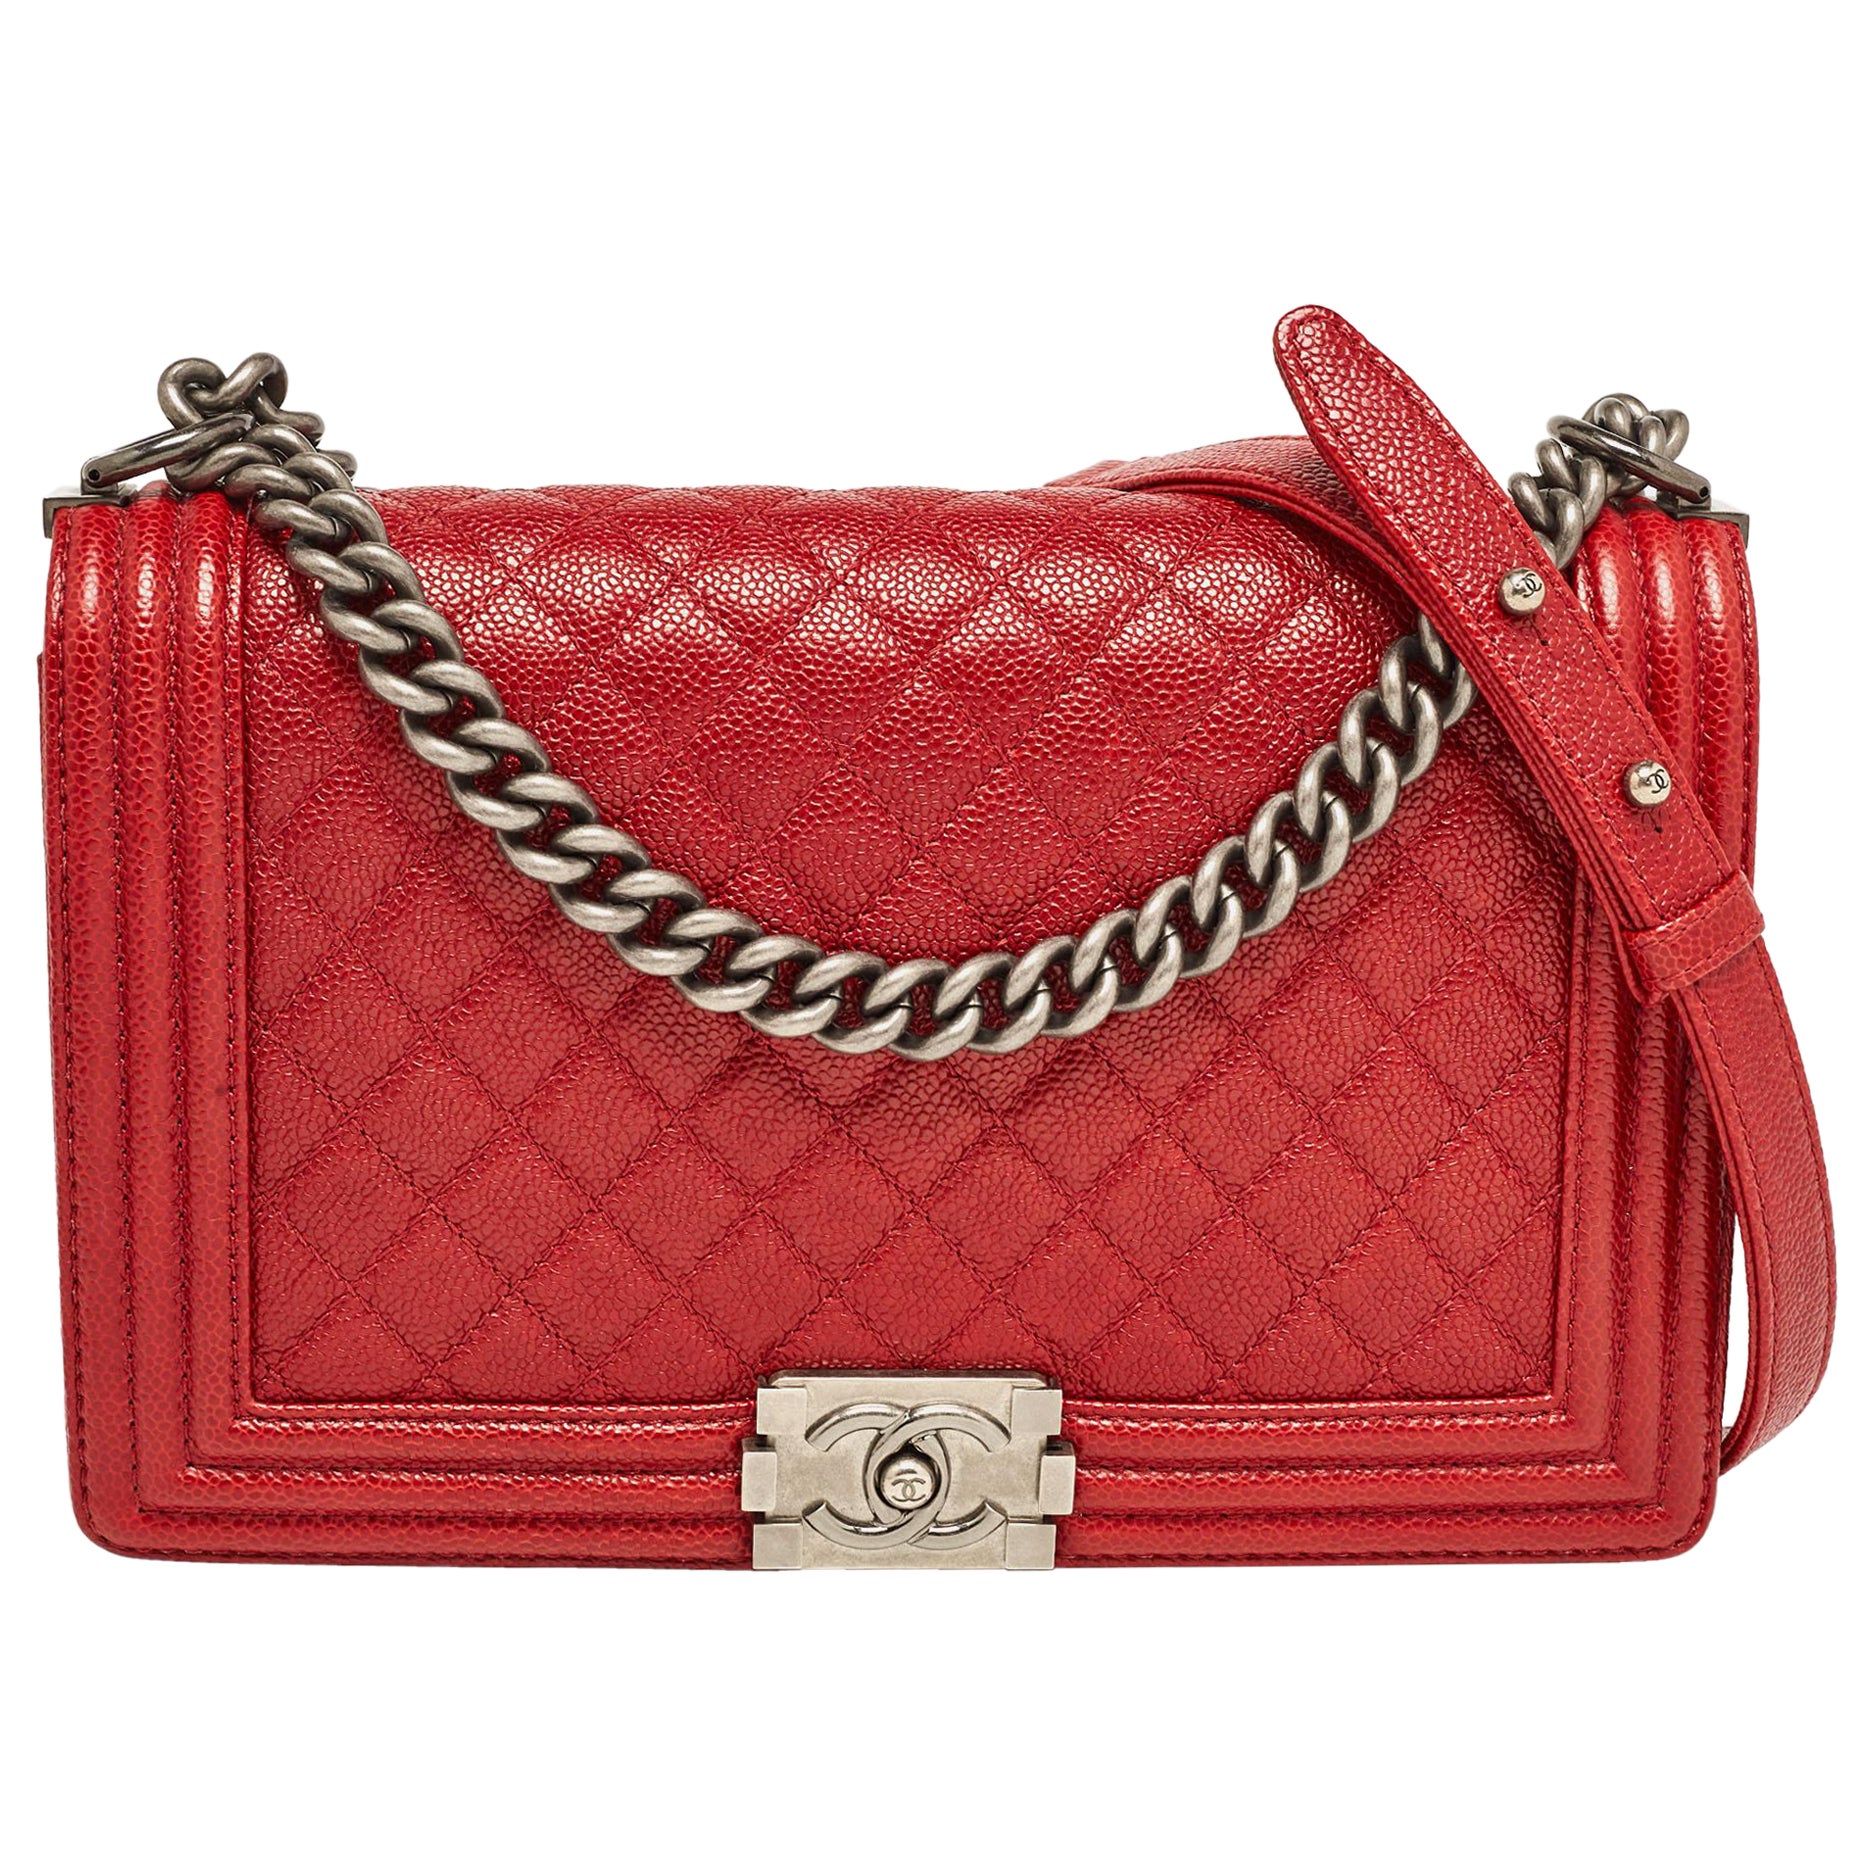 Chanel Red Quilted Caviar Leather New Medium Boy Bag For Sale